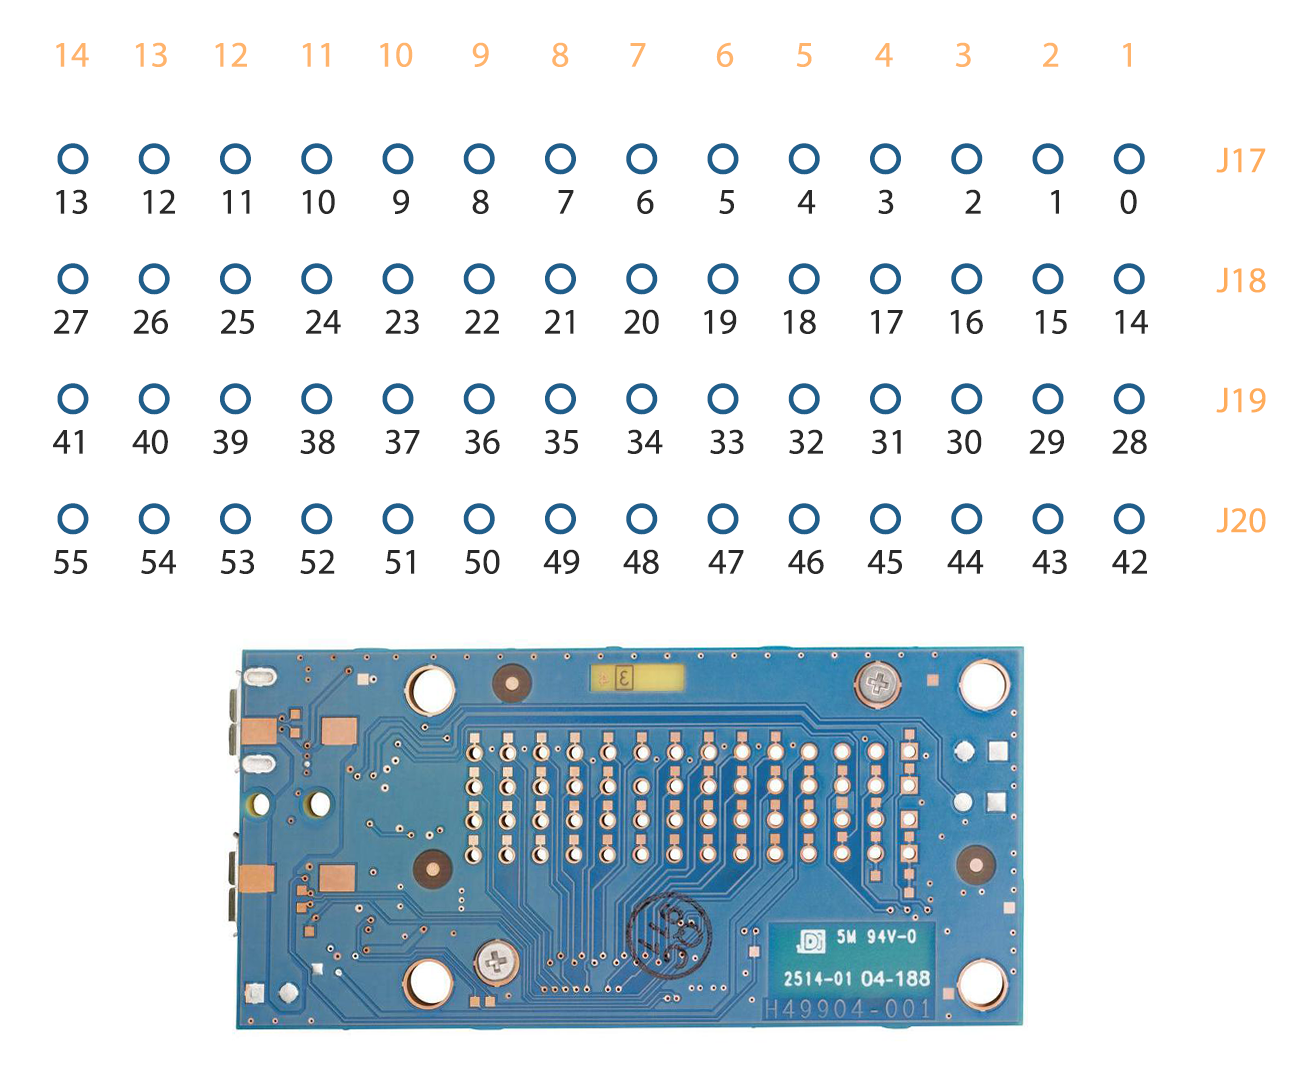 {{:iot:labs:edison_pins.png?300|